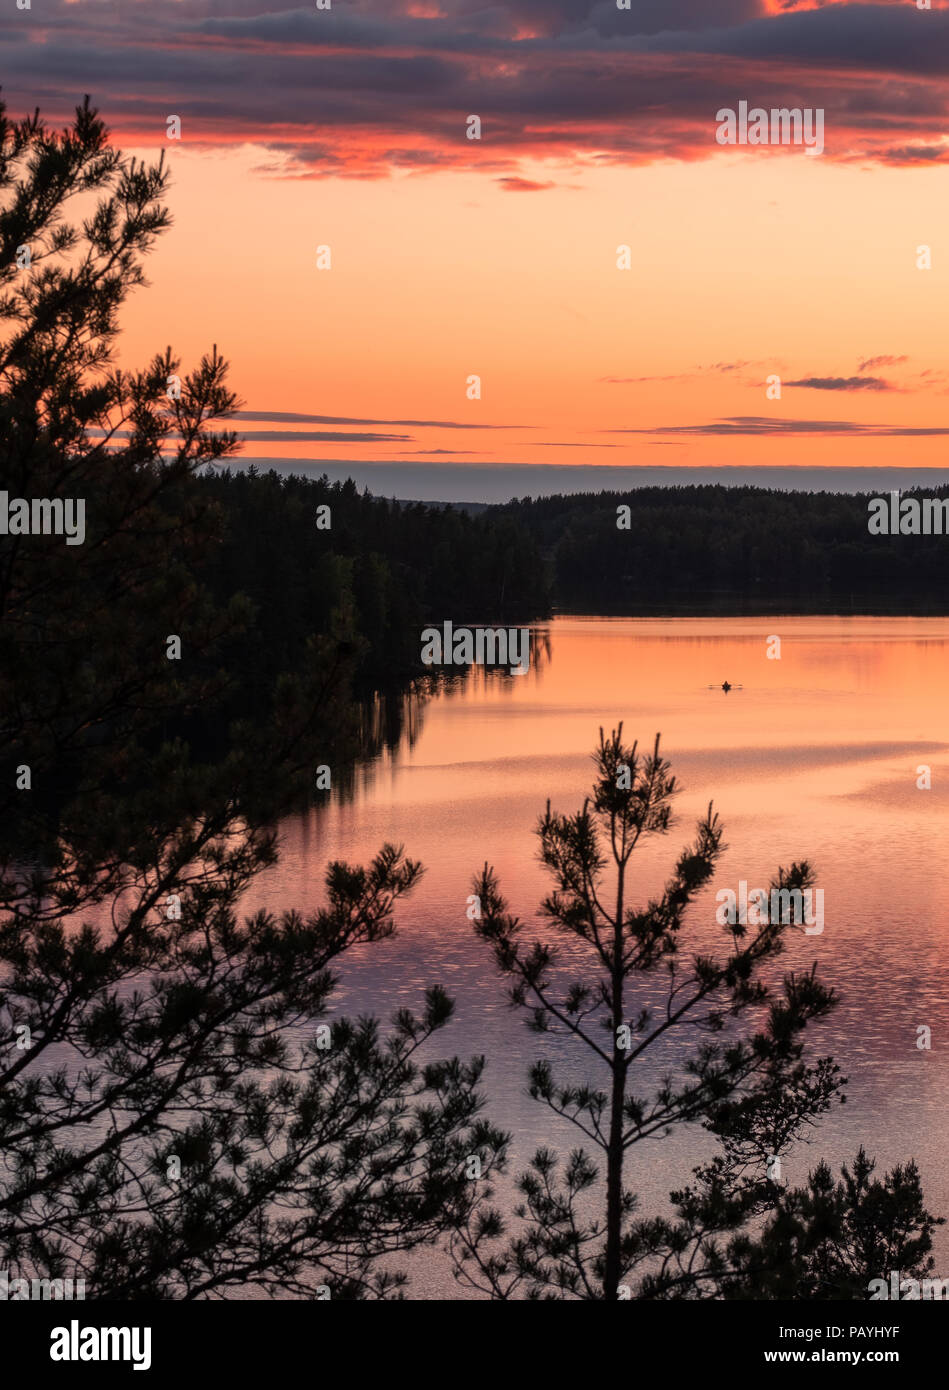 Sunset landscape with peaceful lake and row boat at summer night in Finland. Stock Photo